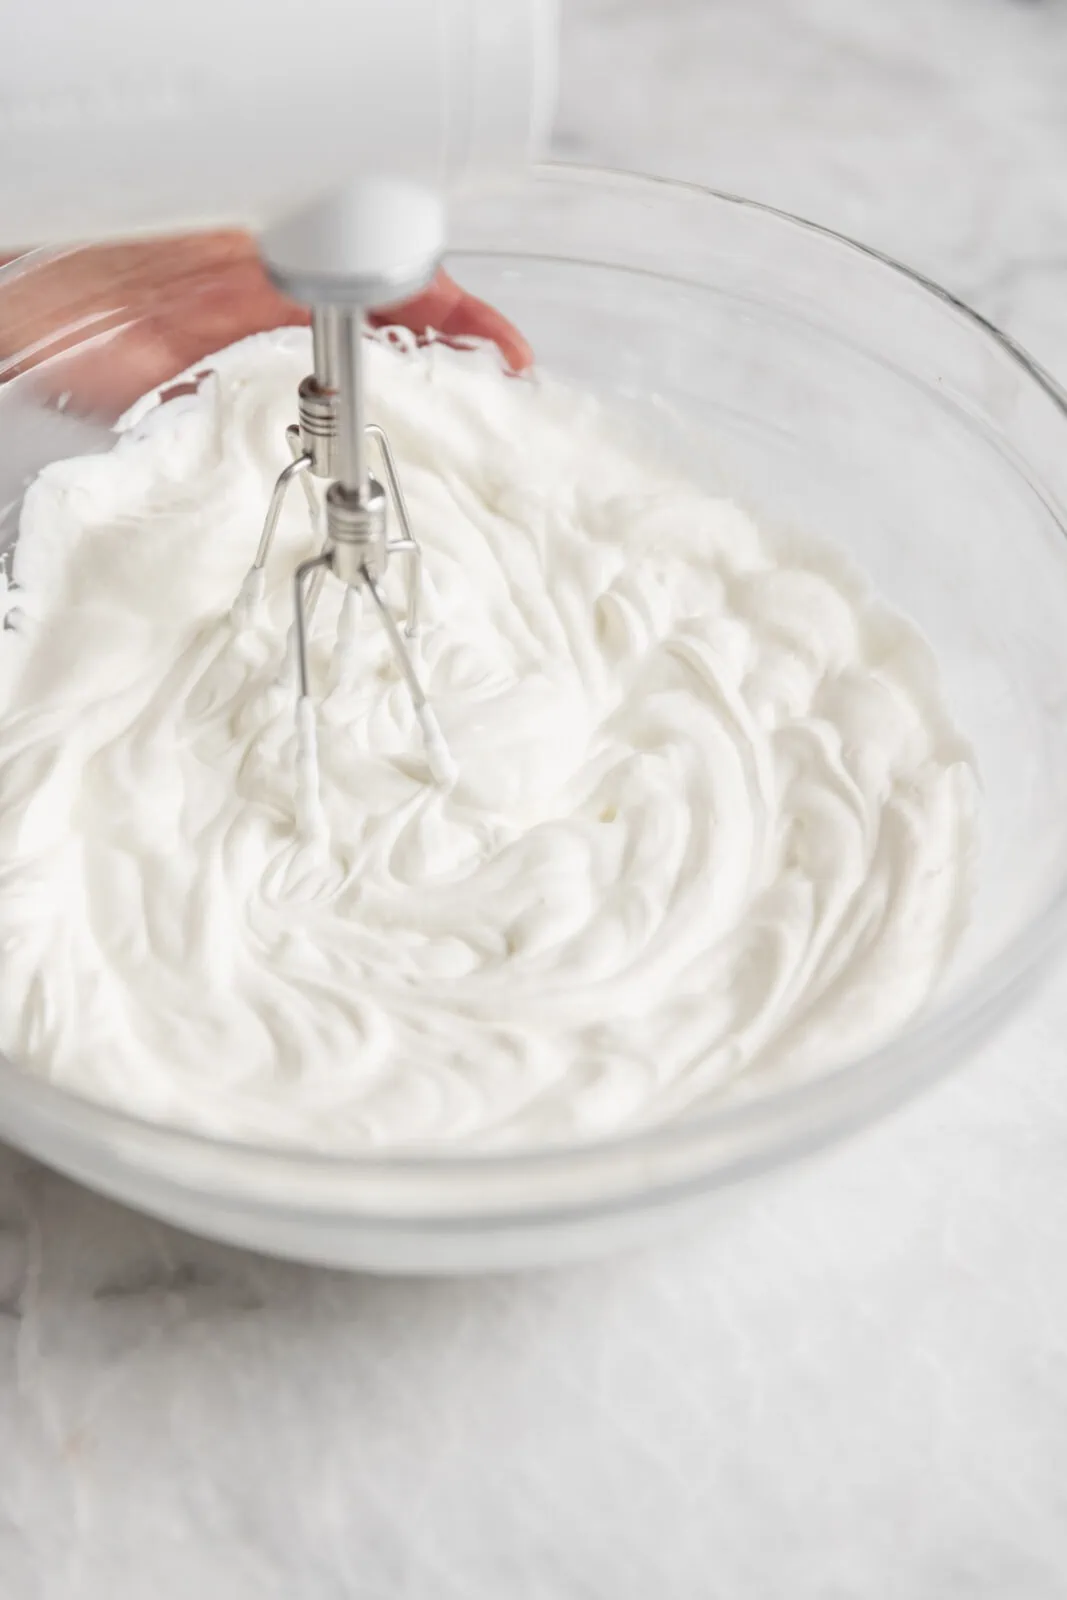 whipped cream being mixed